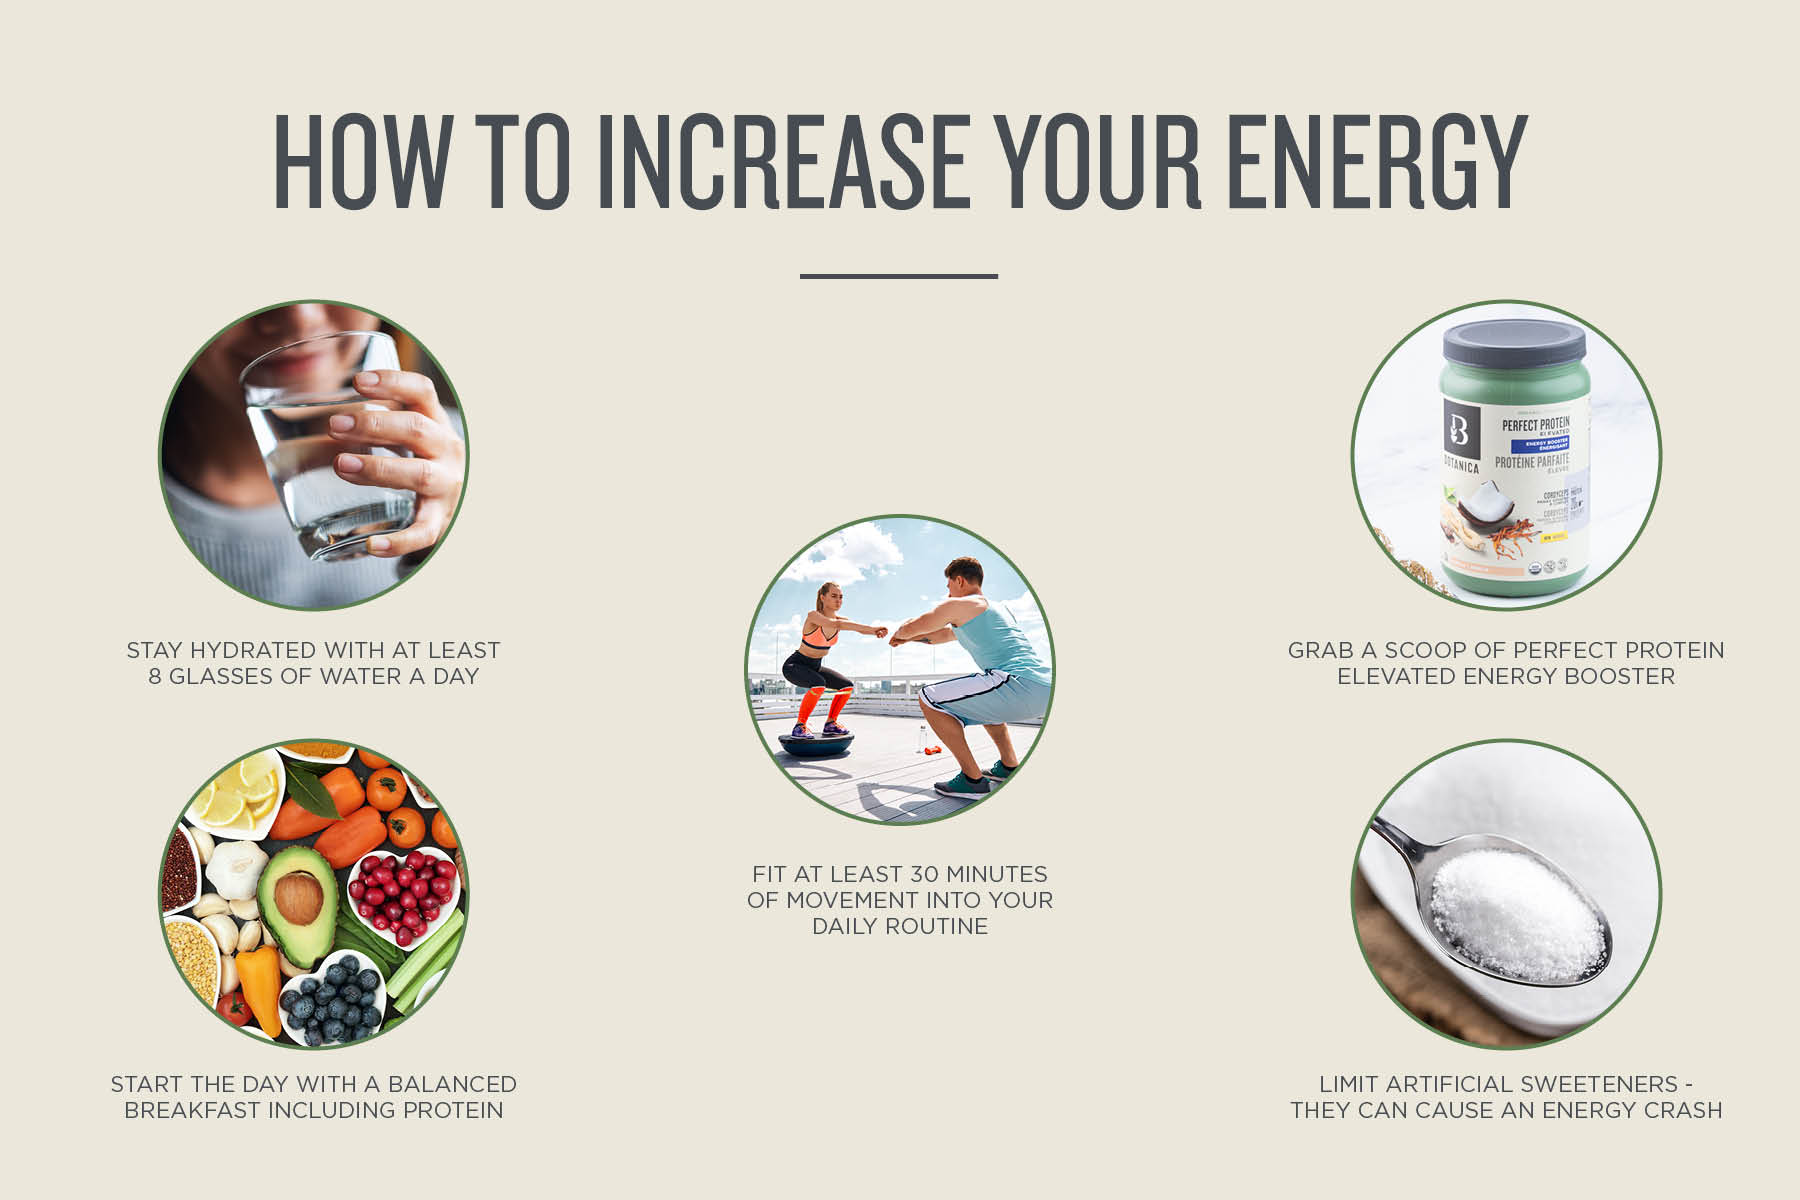 15 Healthy habits - how to increase energy